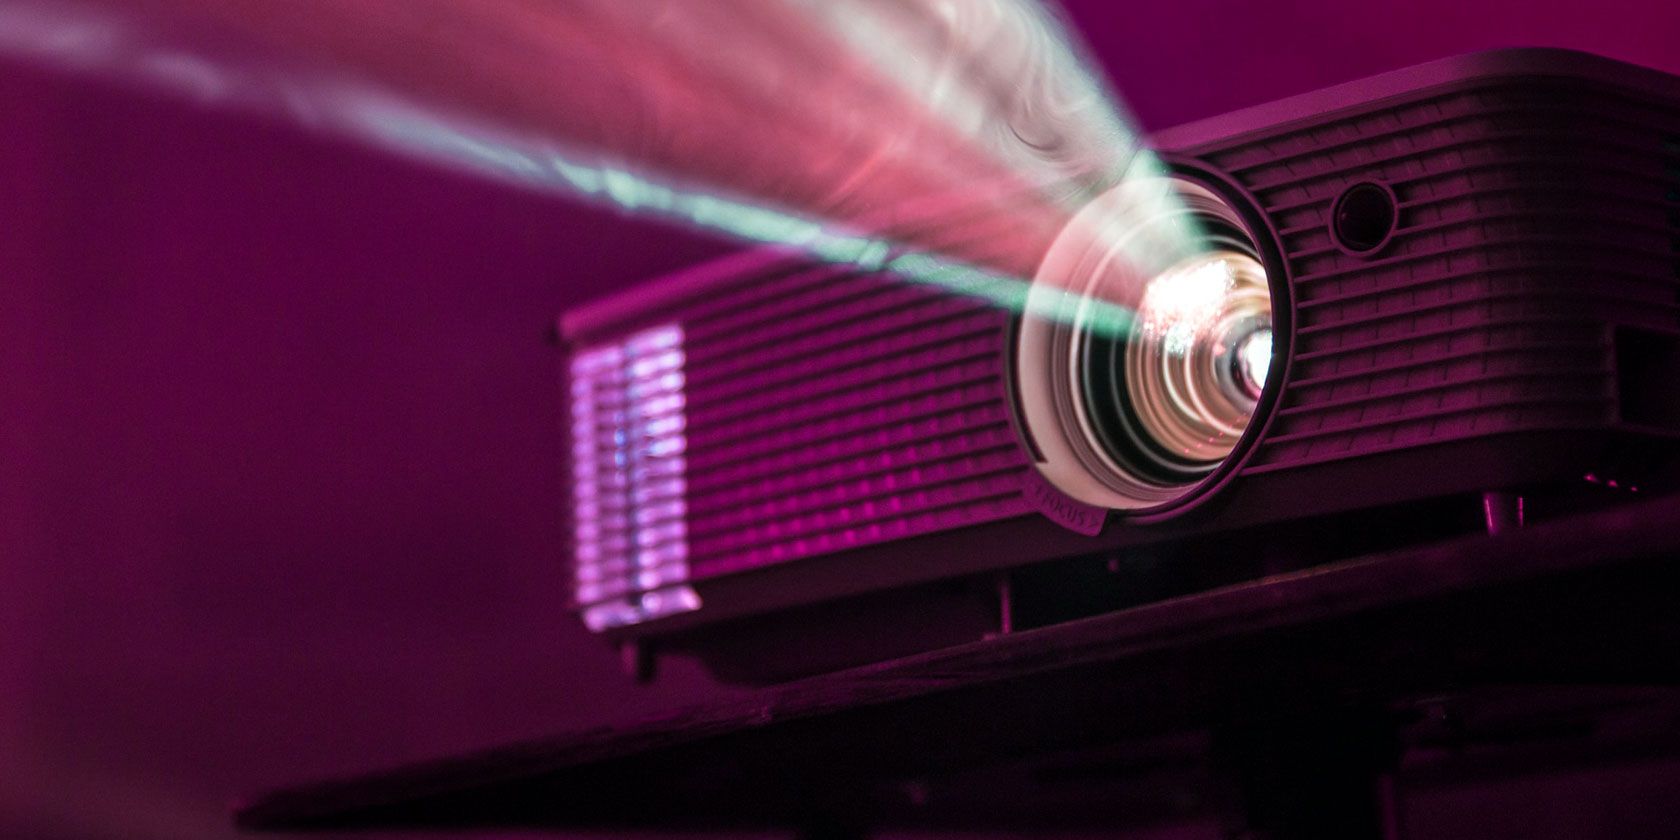 best projector for home theater